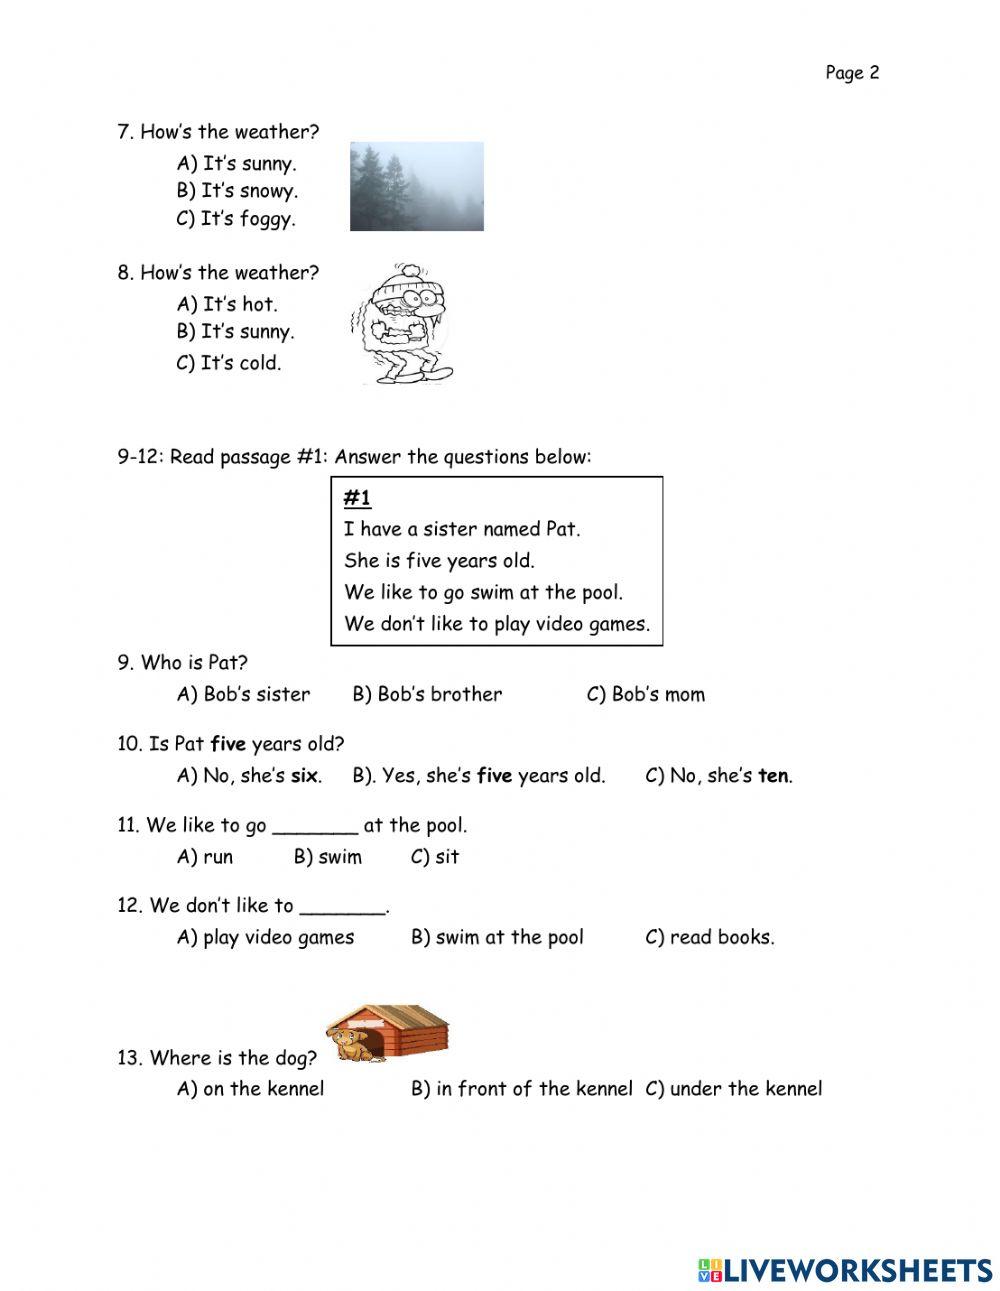 P1 Practice English Test for PreFinal